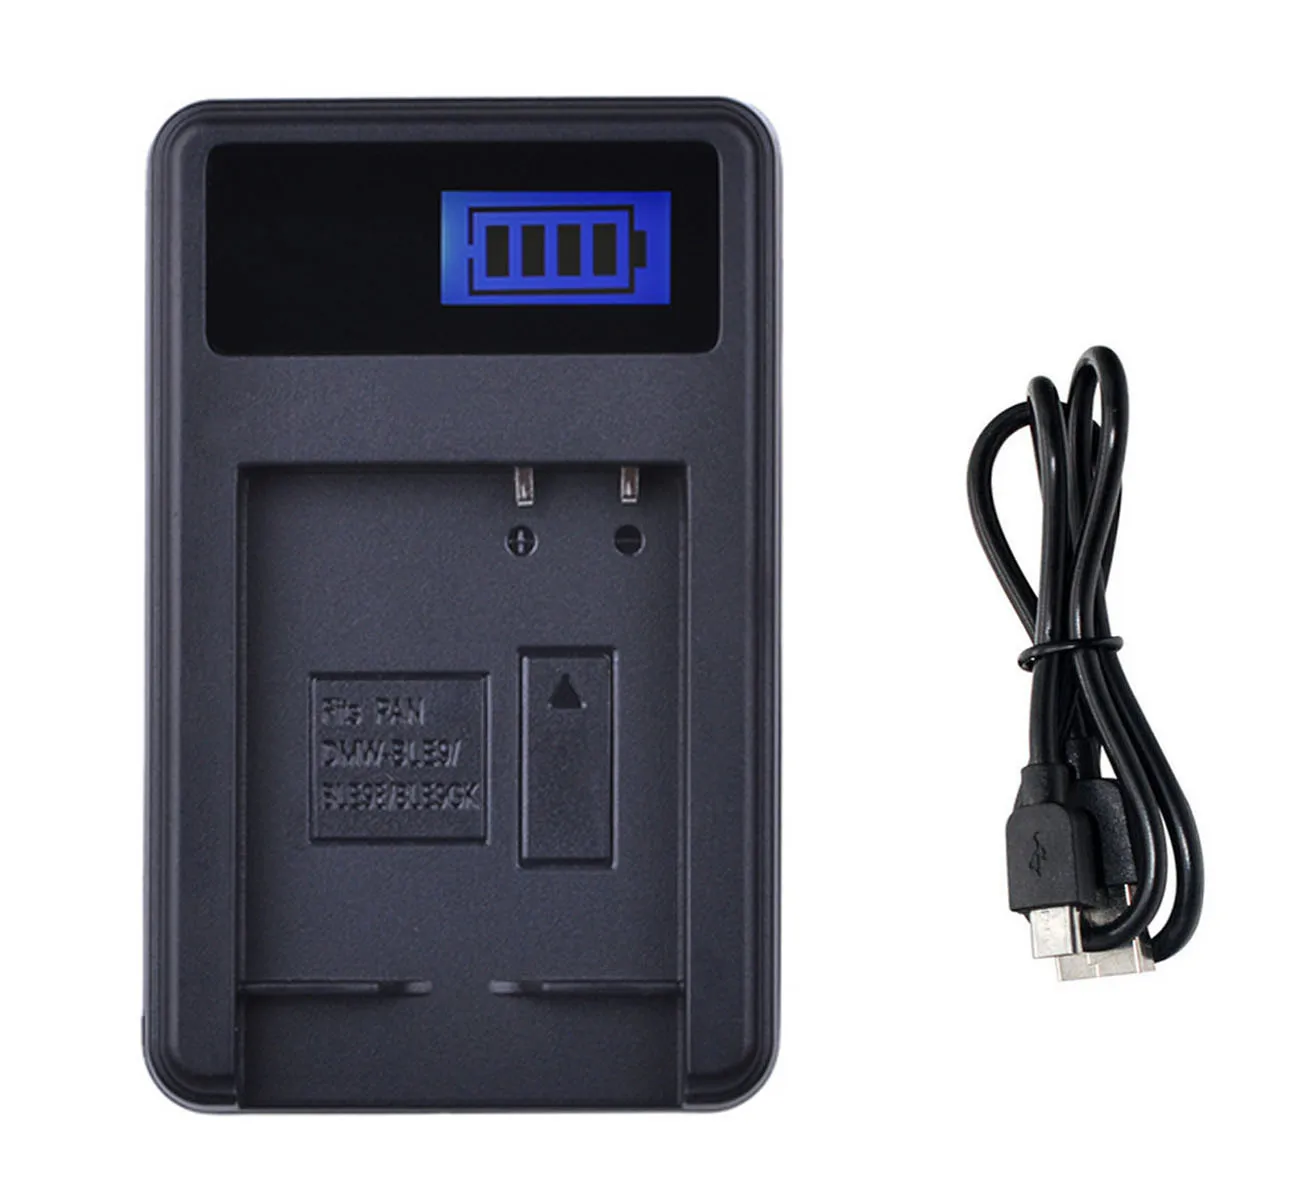 Battery Charger for Canon PowerShot SX620, SX720, SX730, SX740 HS, SX620HS, SX720HS, SX730HS, SX740HS Digital Camera